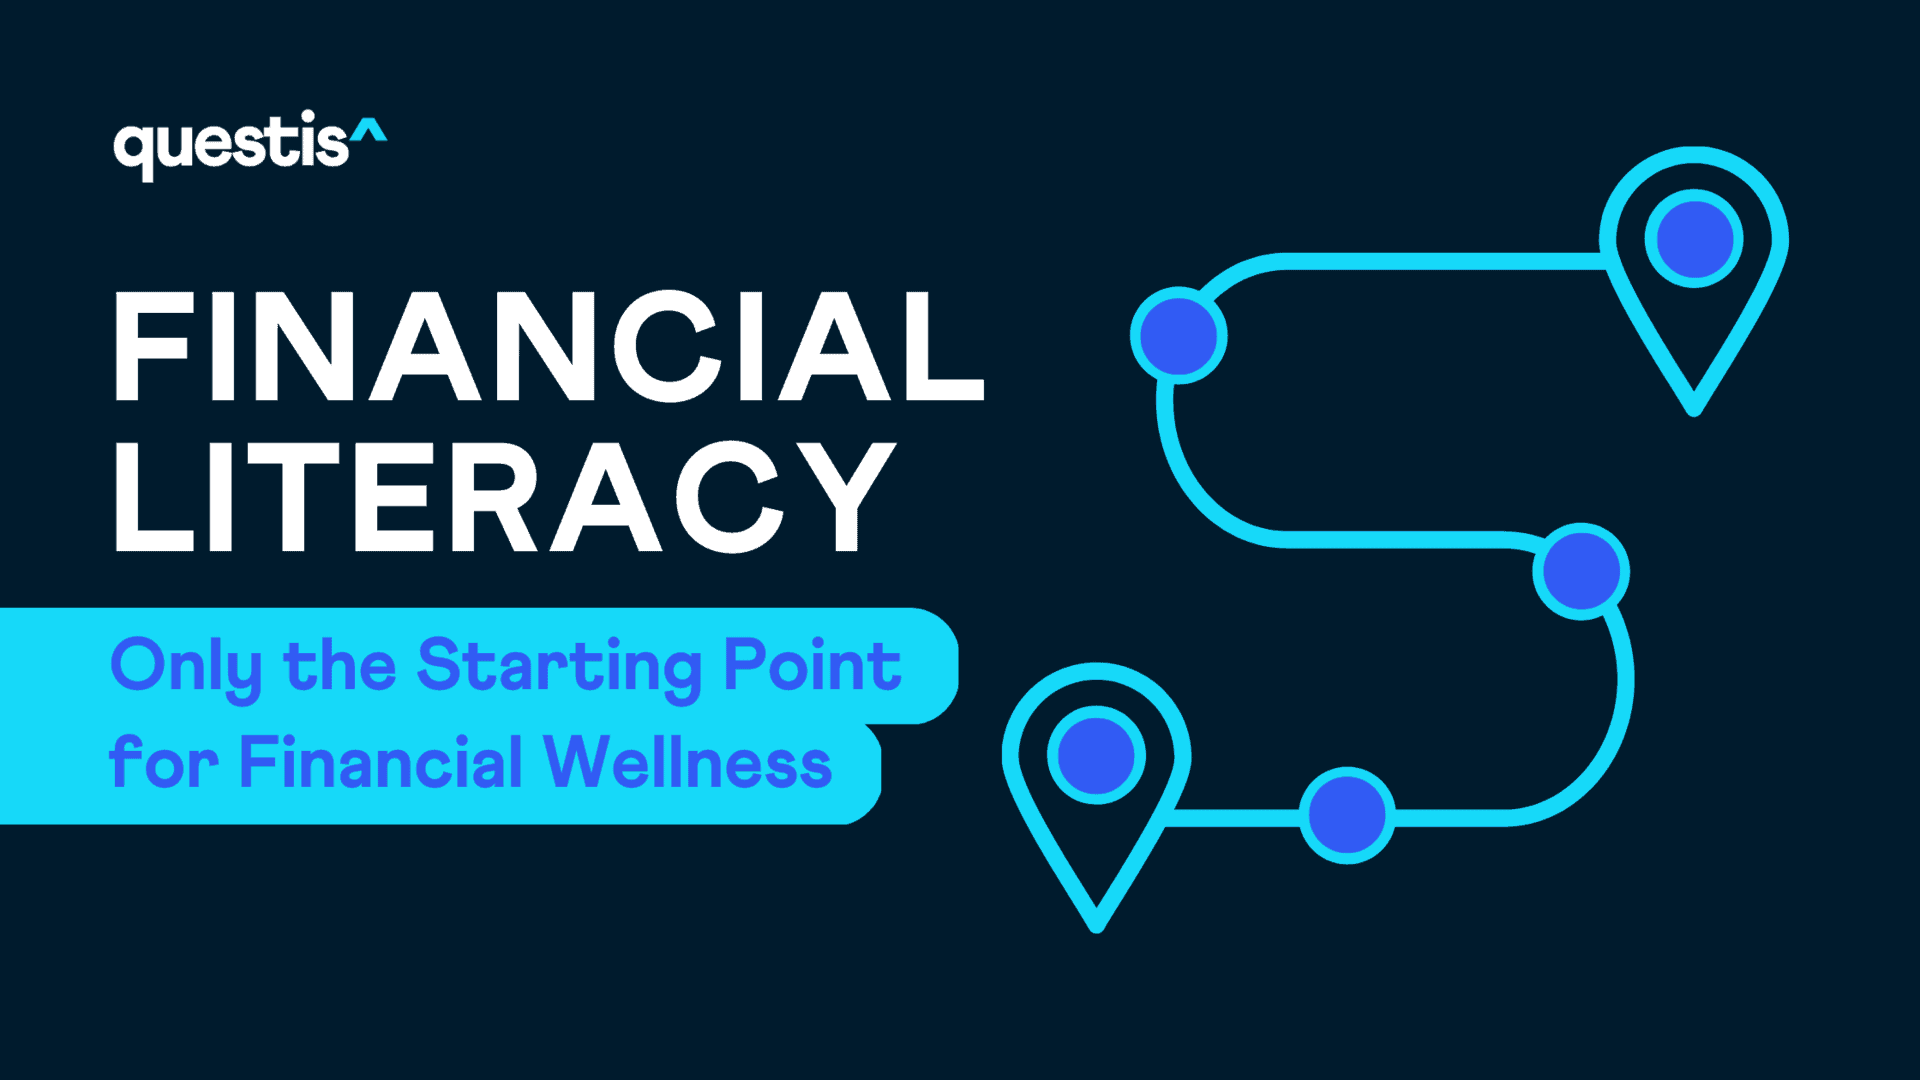 Financial Literacy: Only the Starting Point for Financial Wellness